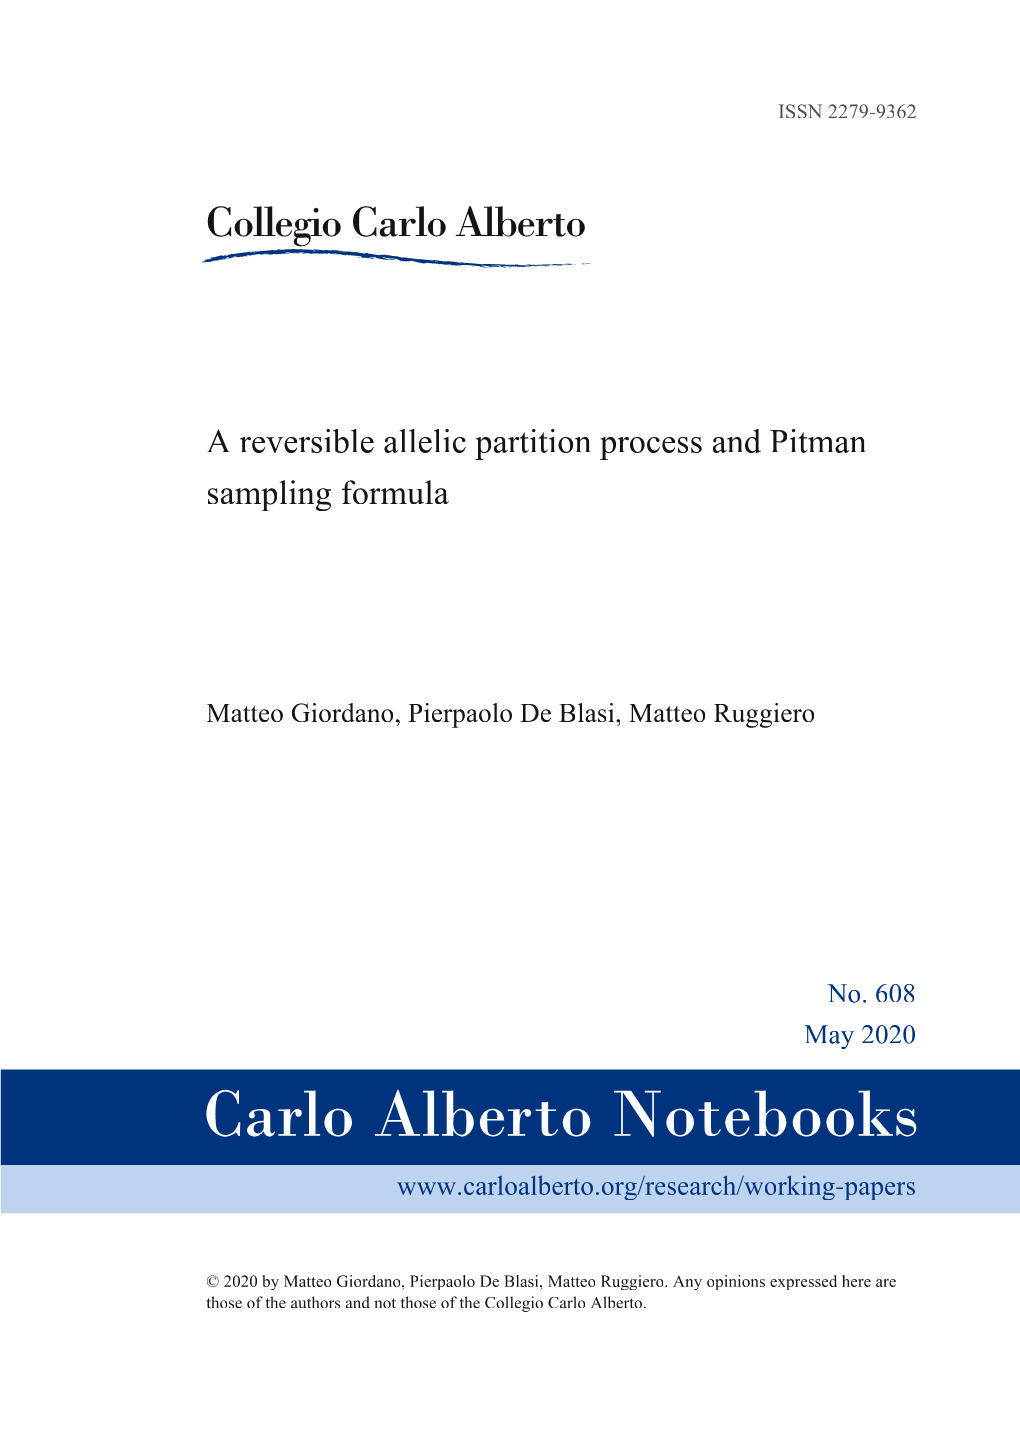 A Reversible Allelic Partition Process and Pitman Sampling Formula